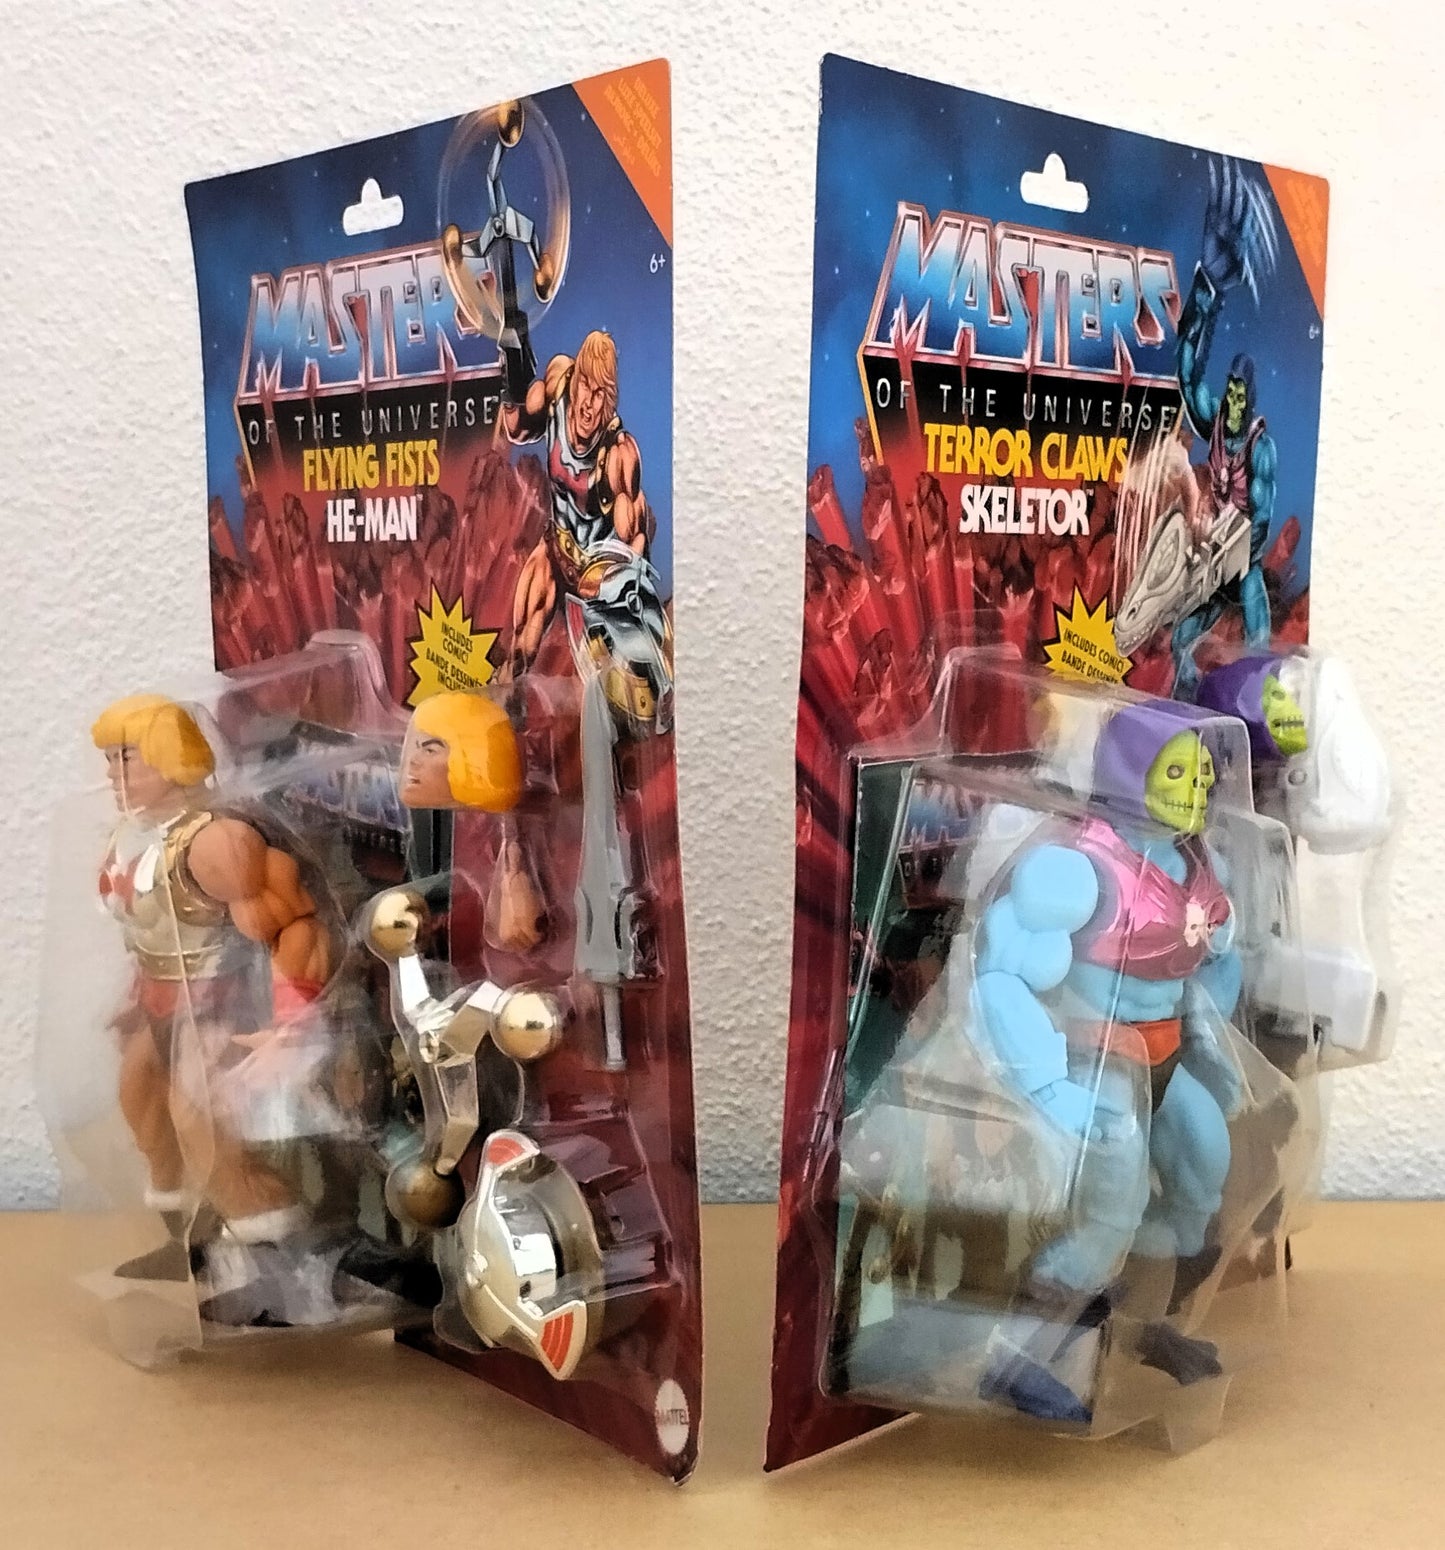 Masters Of The Universe Origins Deluxe Flying Fist He-Man & Terror Claws Skeletor Mattel